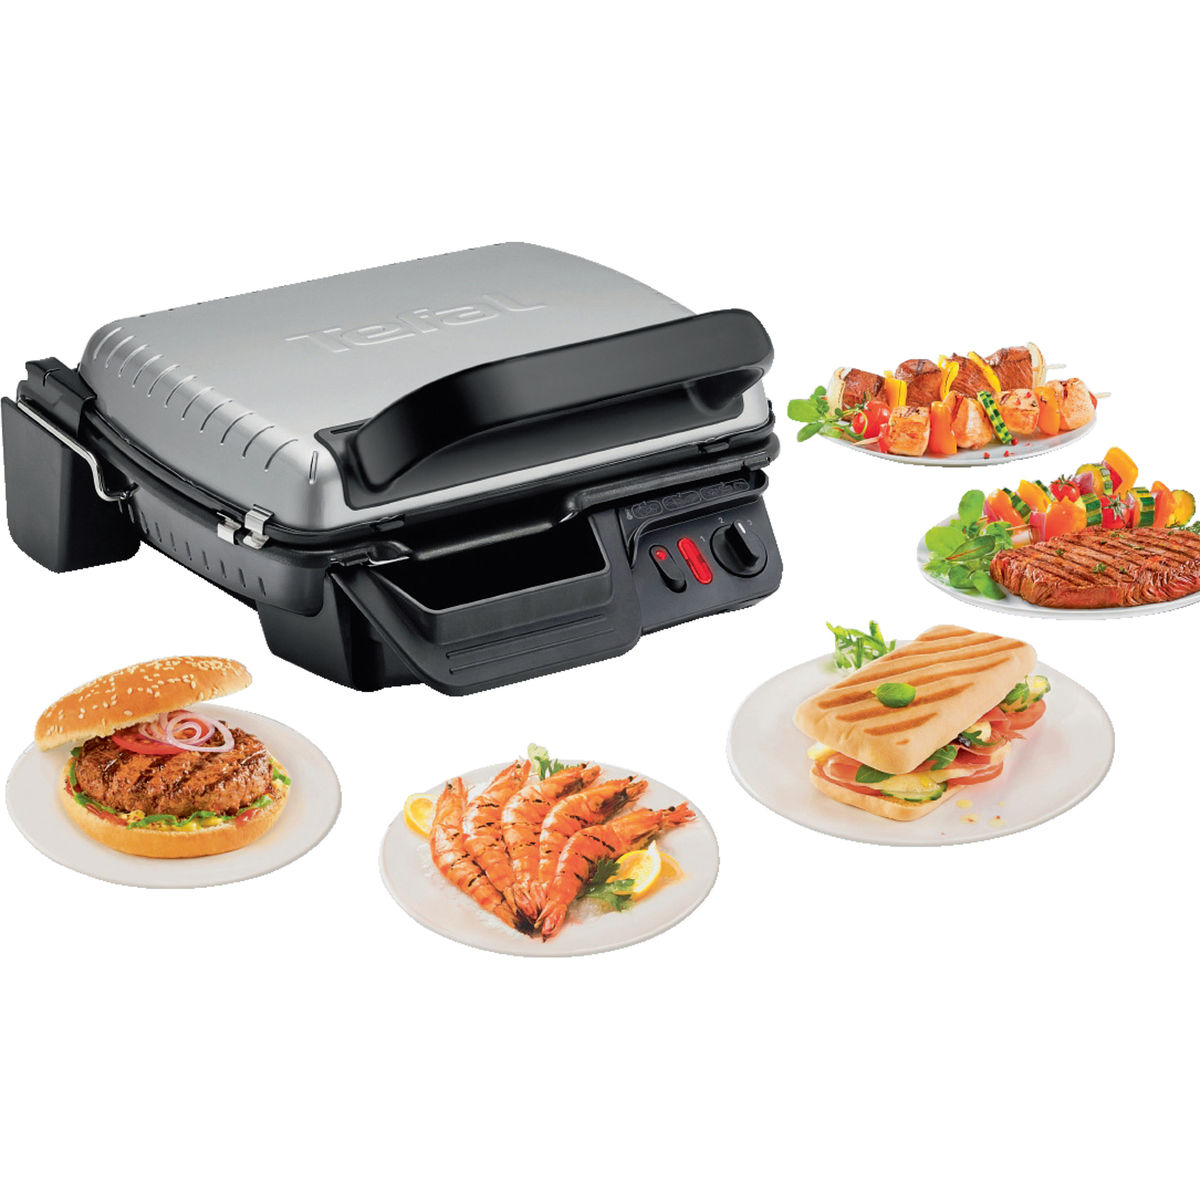 Zuigeling Ironisch pariteit Tefal Compact Grill Contact grill - GC305012 | Carrefour Site